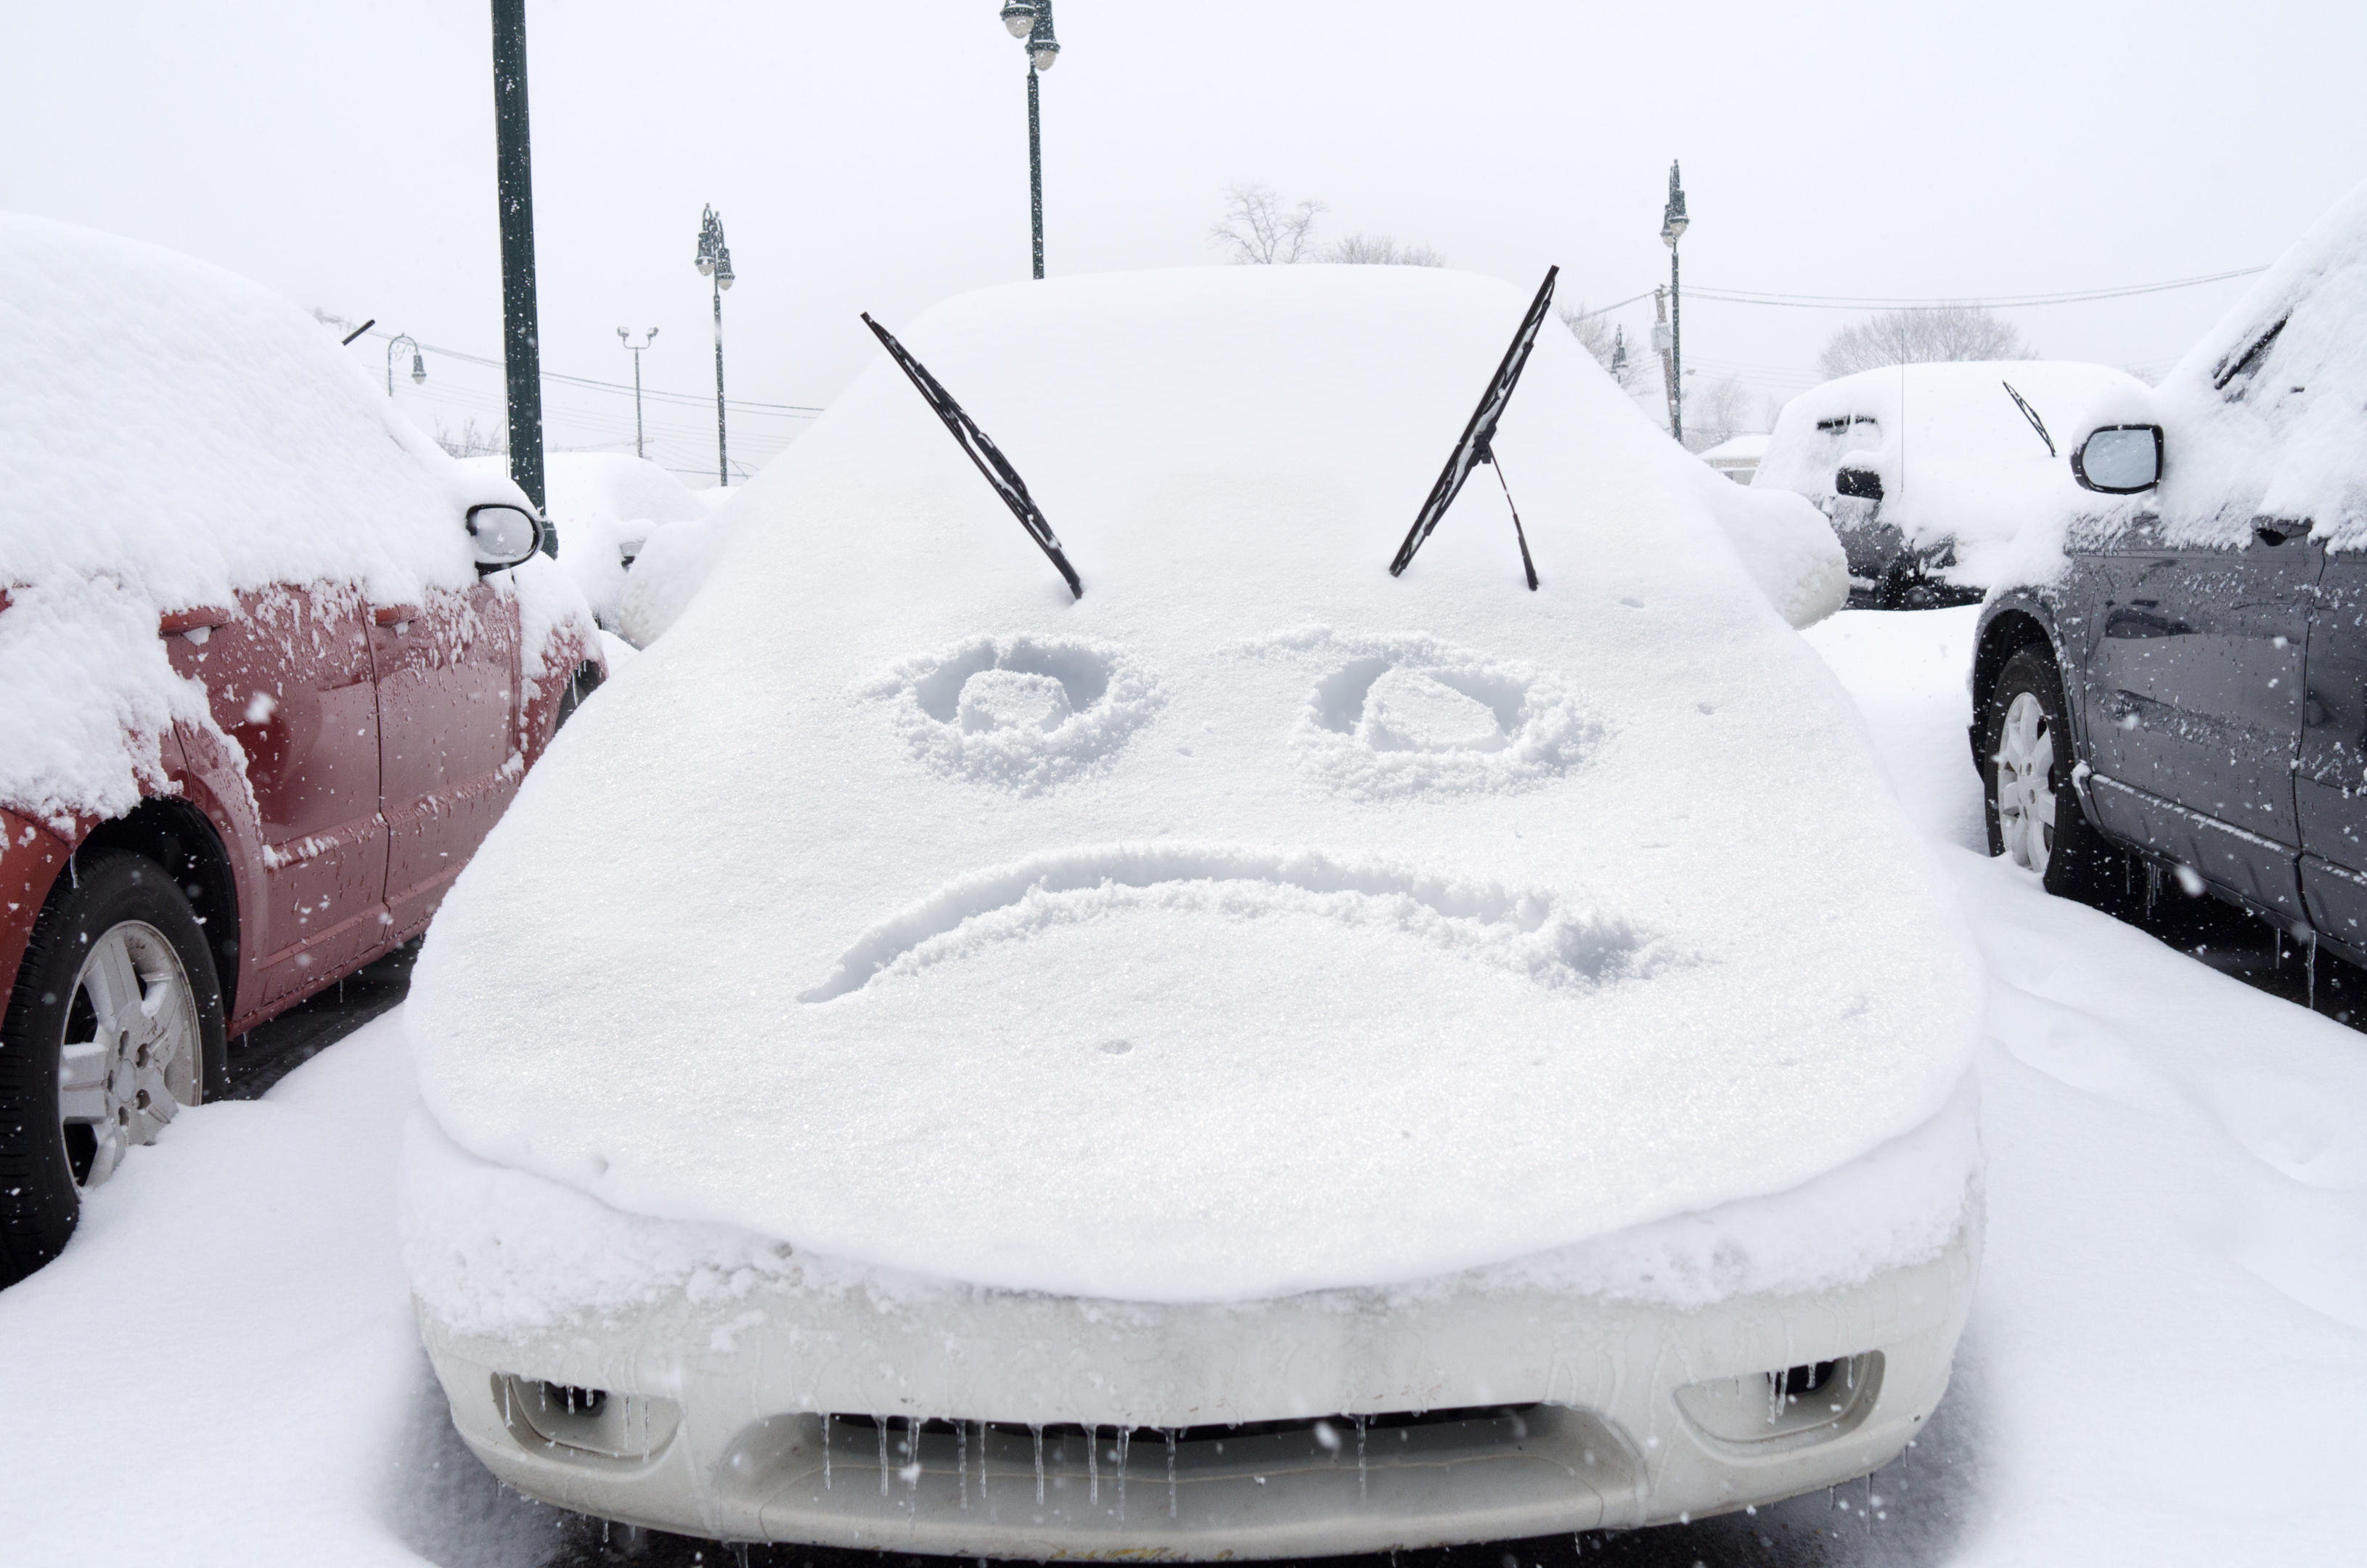 Winter Driving Tip: Always keep extra winter wiper blades in your winter car emergency kit.